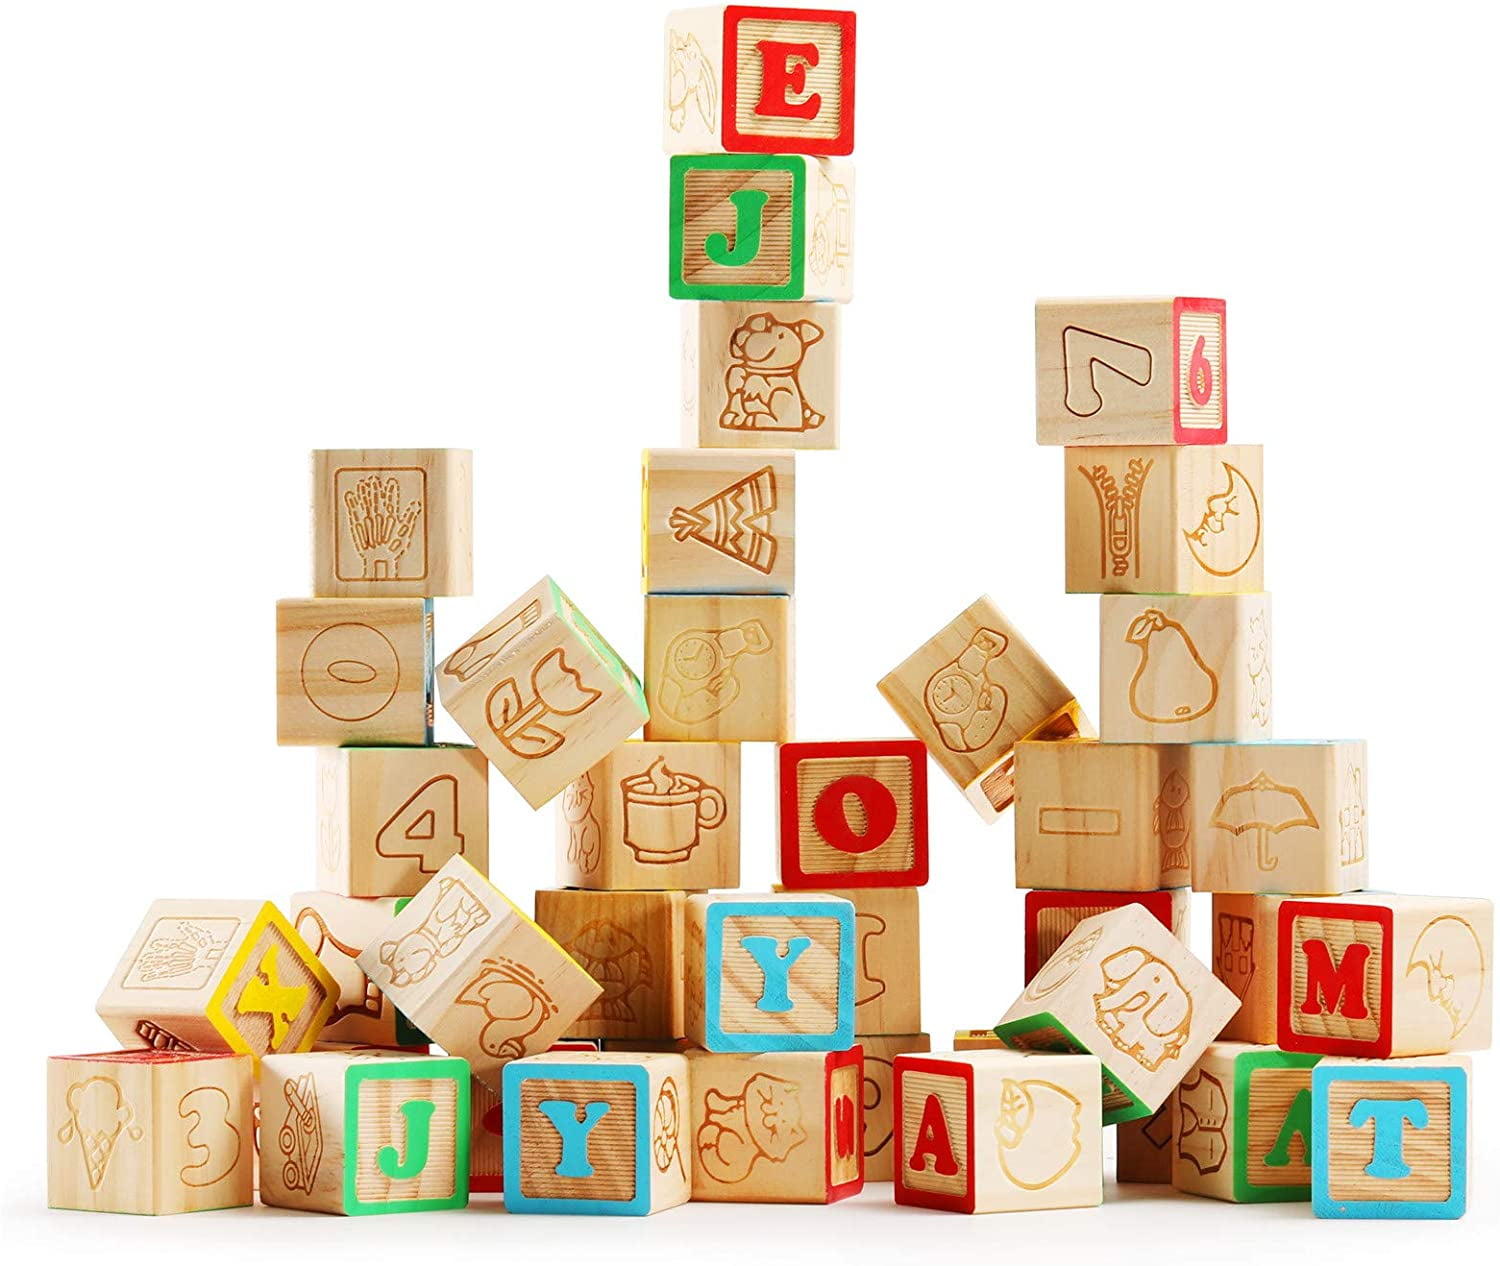 ABC Pre-Kindergarten Toy for Toddlers Educational Wood Alphabet & Number Blocks